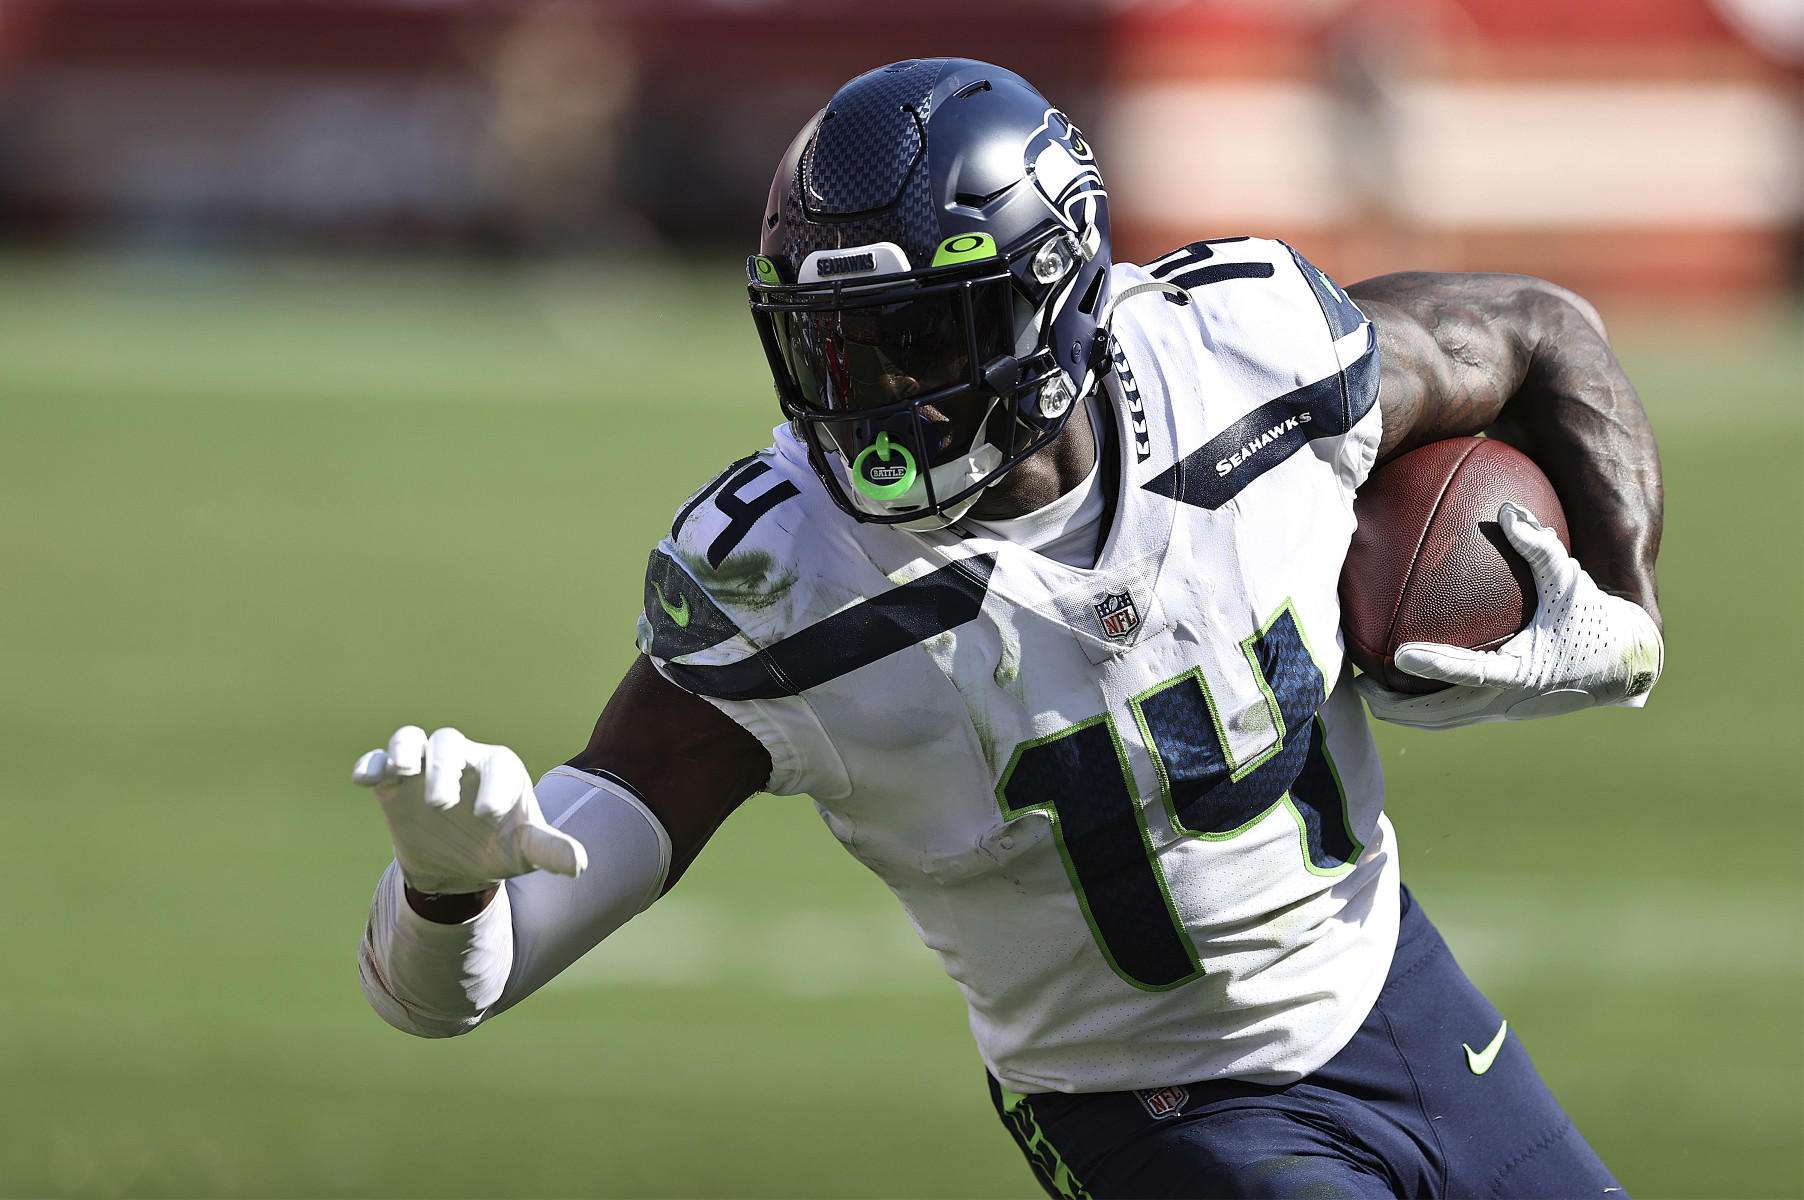 Seahawks' DK Metcalf claims to be the fastest player in the NFL